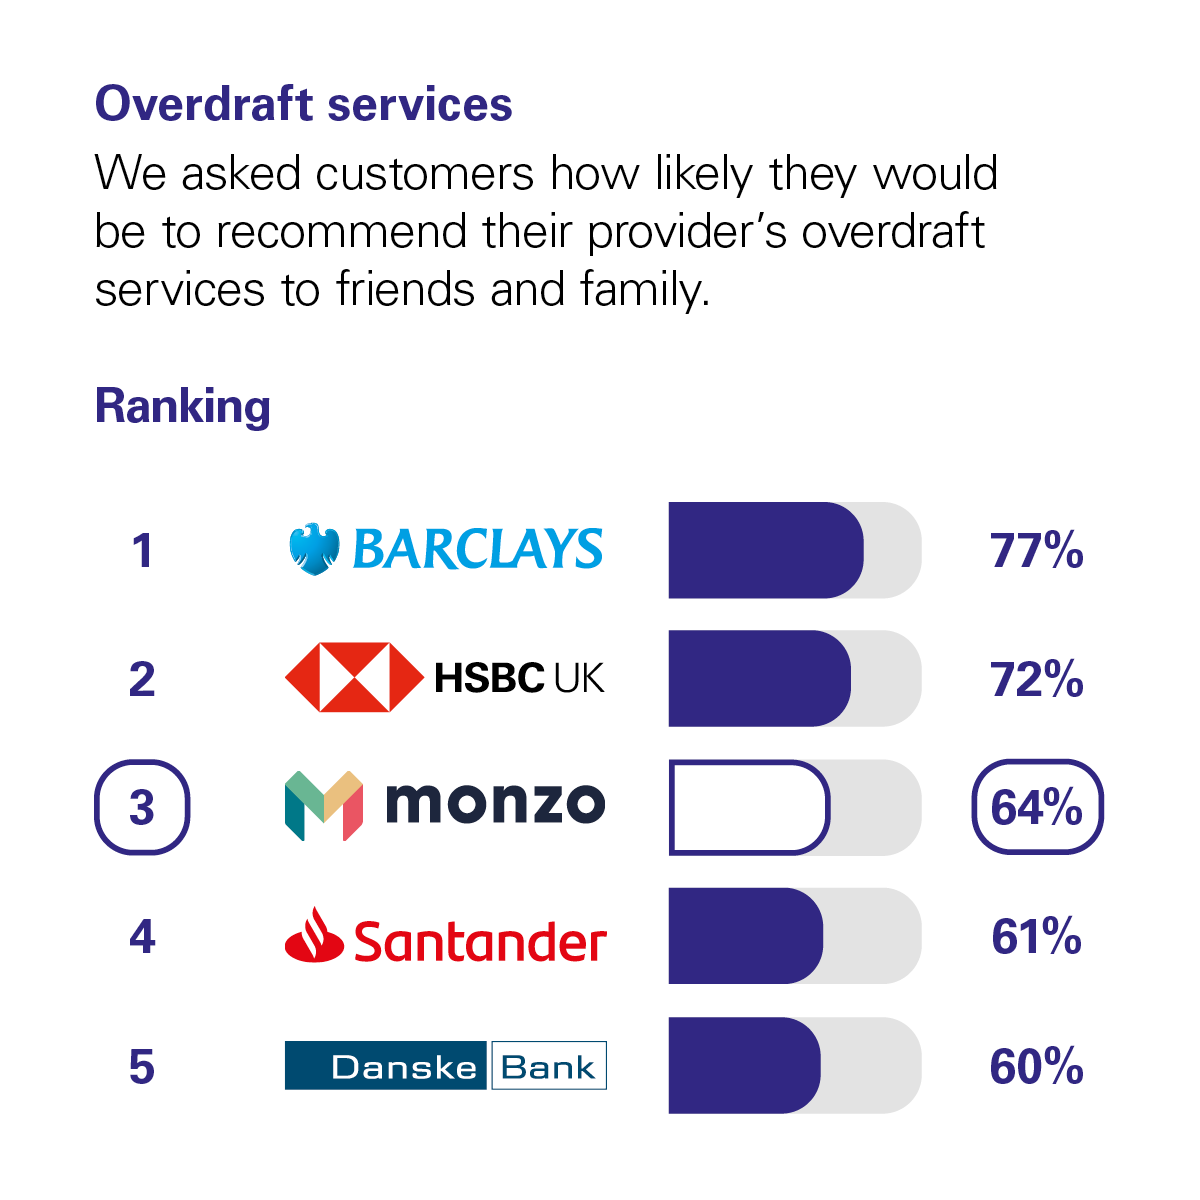 Graph showing the results of the CMA scoring of UK banks in the Overdraft Services category. The CMA asked customers how likely they would be to recommend their provider's overdraft services to friends and family. The rankings with percentage scores are: 1st Barclays with 77%. 2nd HSBC UK with 72%. 3rd Monzo with 64%. 4th Santander with 61%. 5th Danske Bank with 60%.